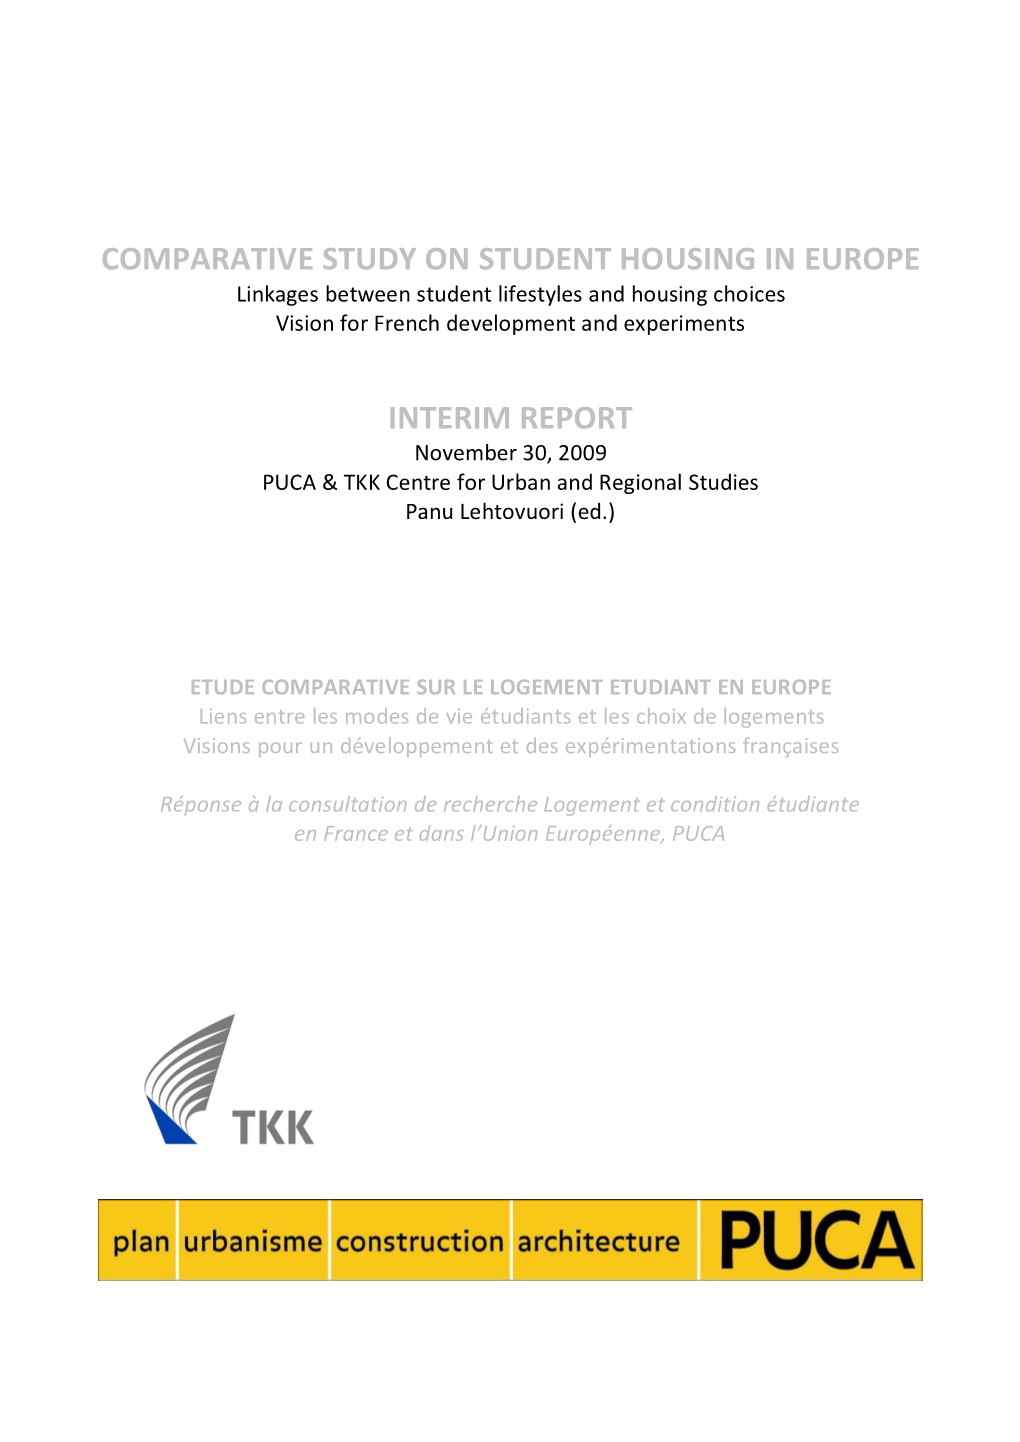 COMPARATIVE STUDY on STUDENT HOUSING in EUROPE Linkages Between Student Lifestyles and Housing Choices Vision for French Development and Experiments